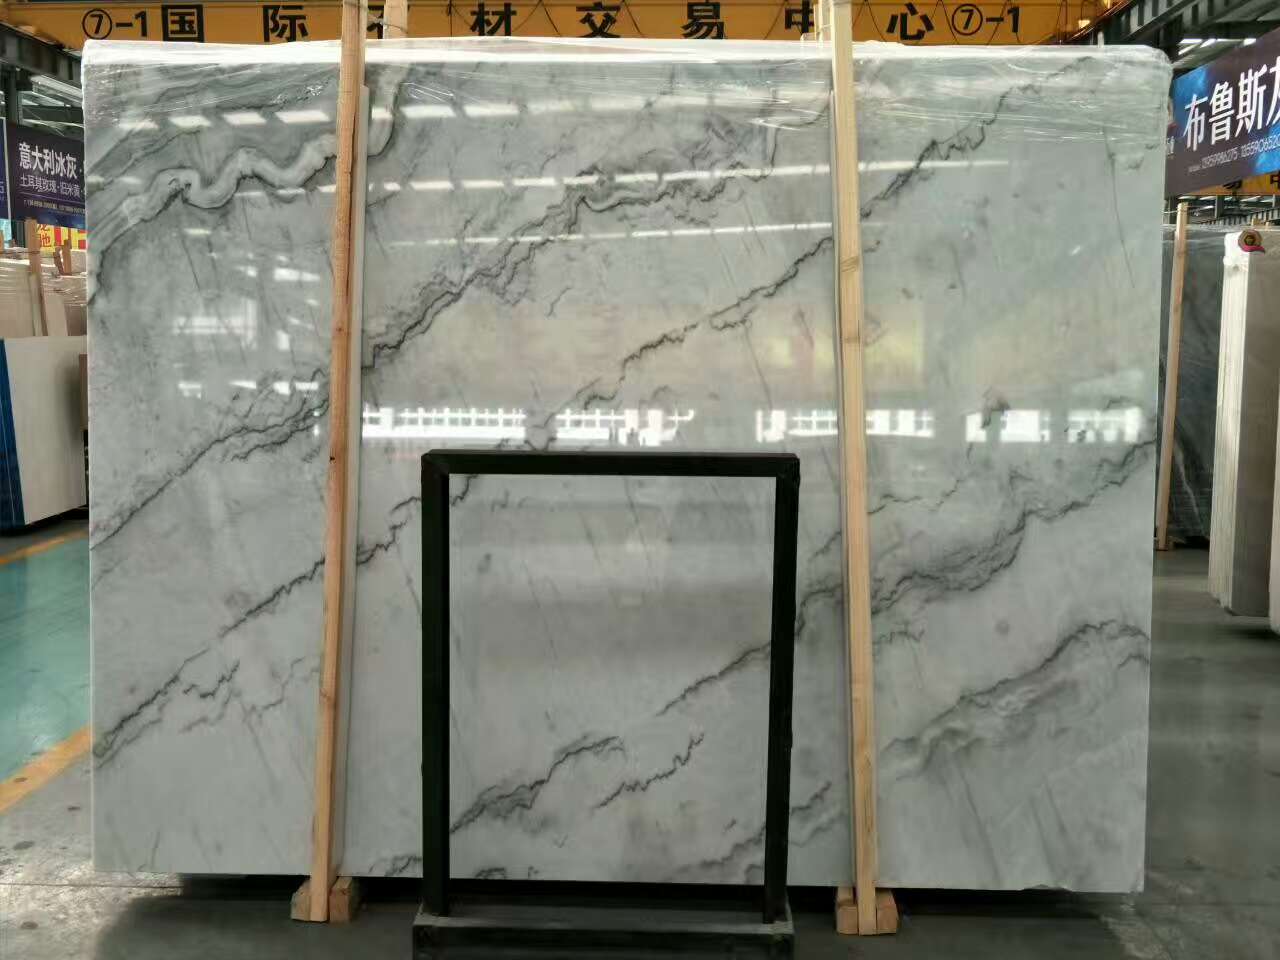 Bookmatched Bruce Grey Marble Slabs